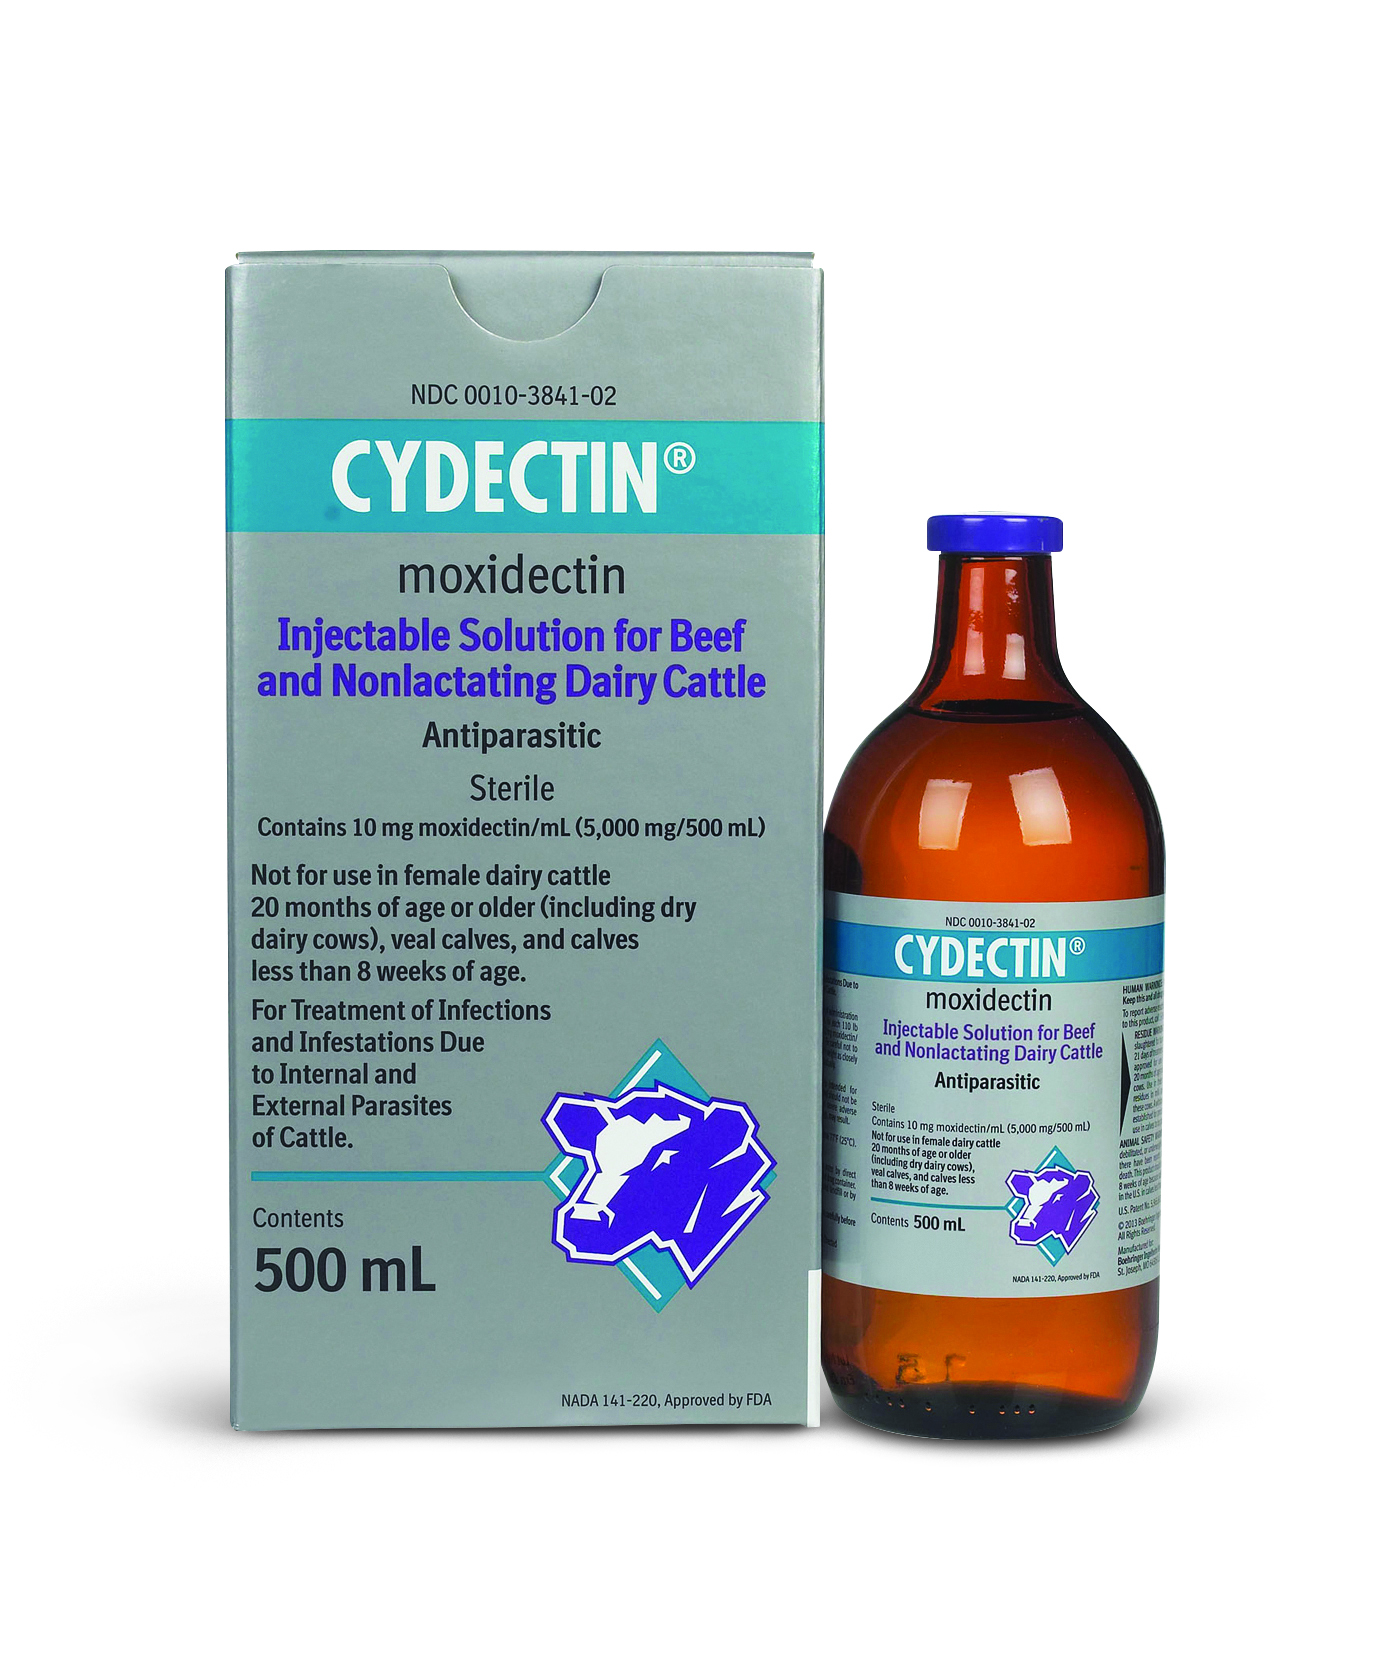 Cydectin® 1% Injectable Solution